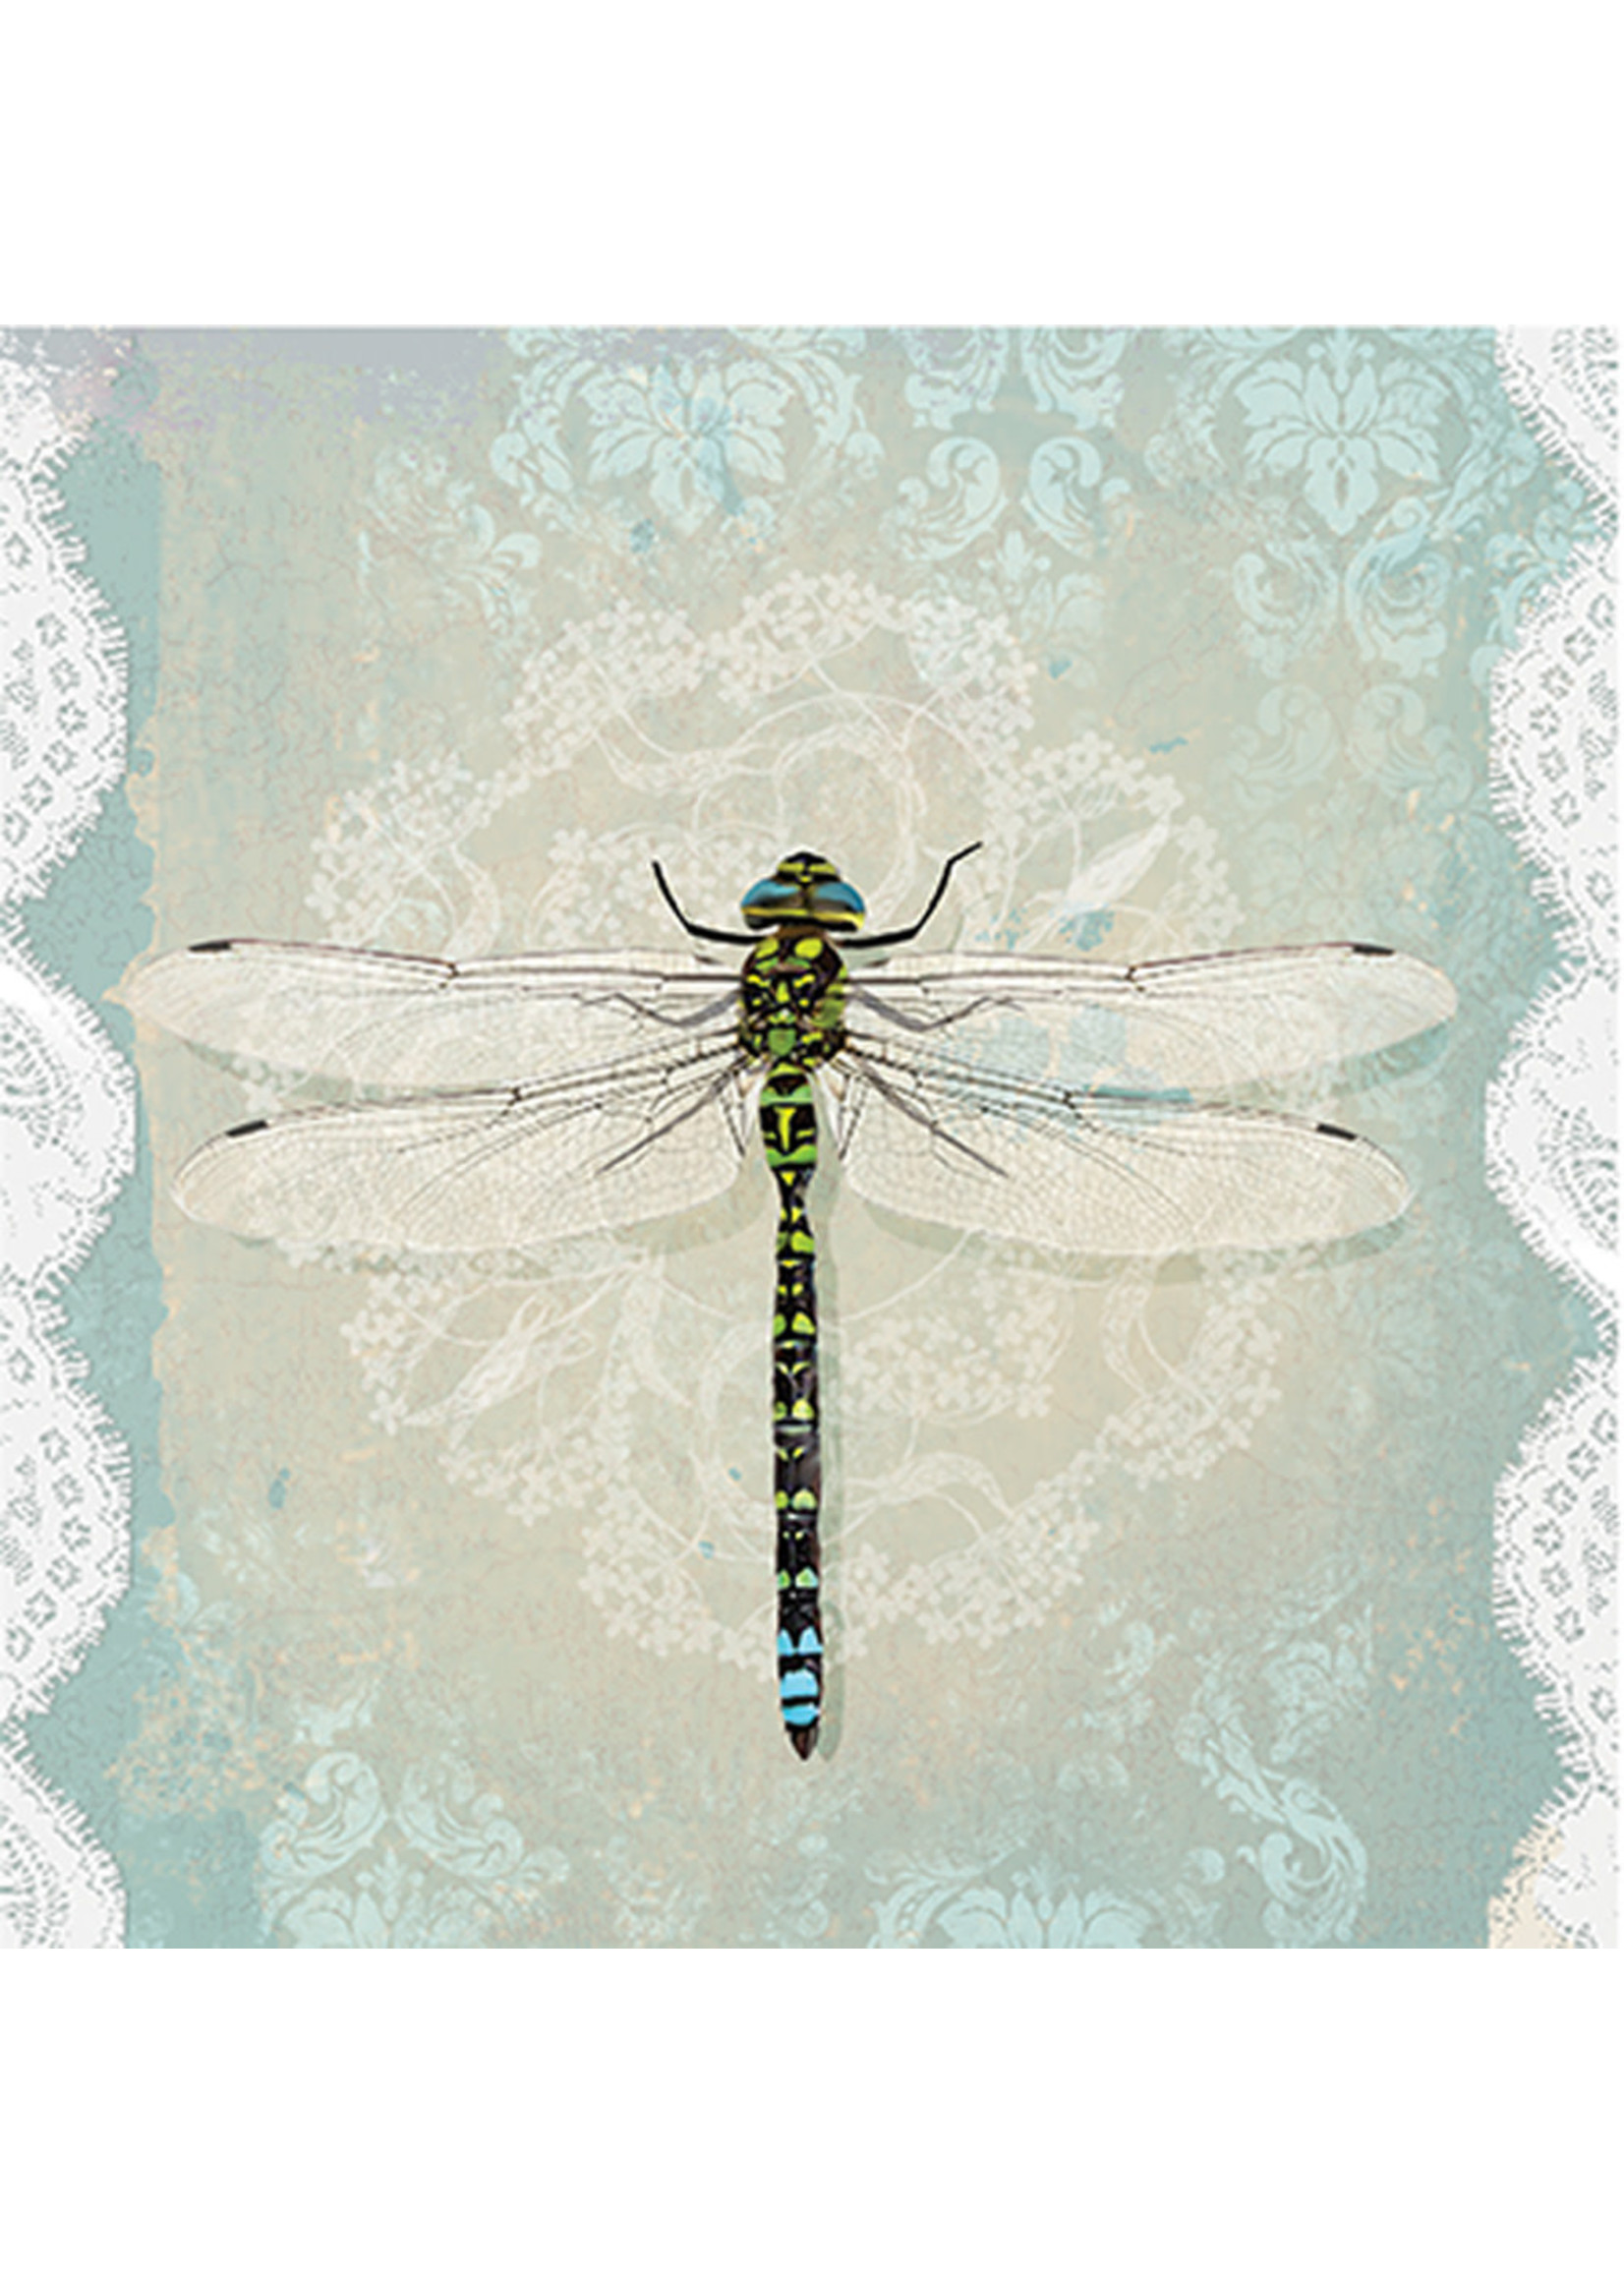 Large Lace Dragonfly Napkins - 20 Pack